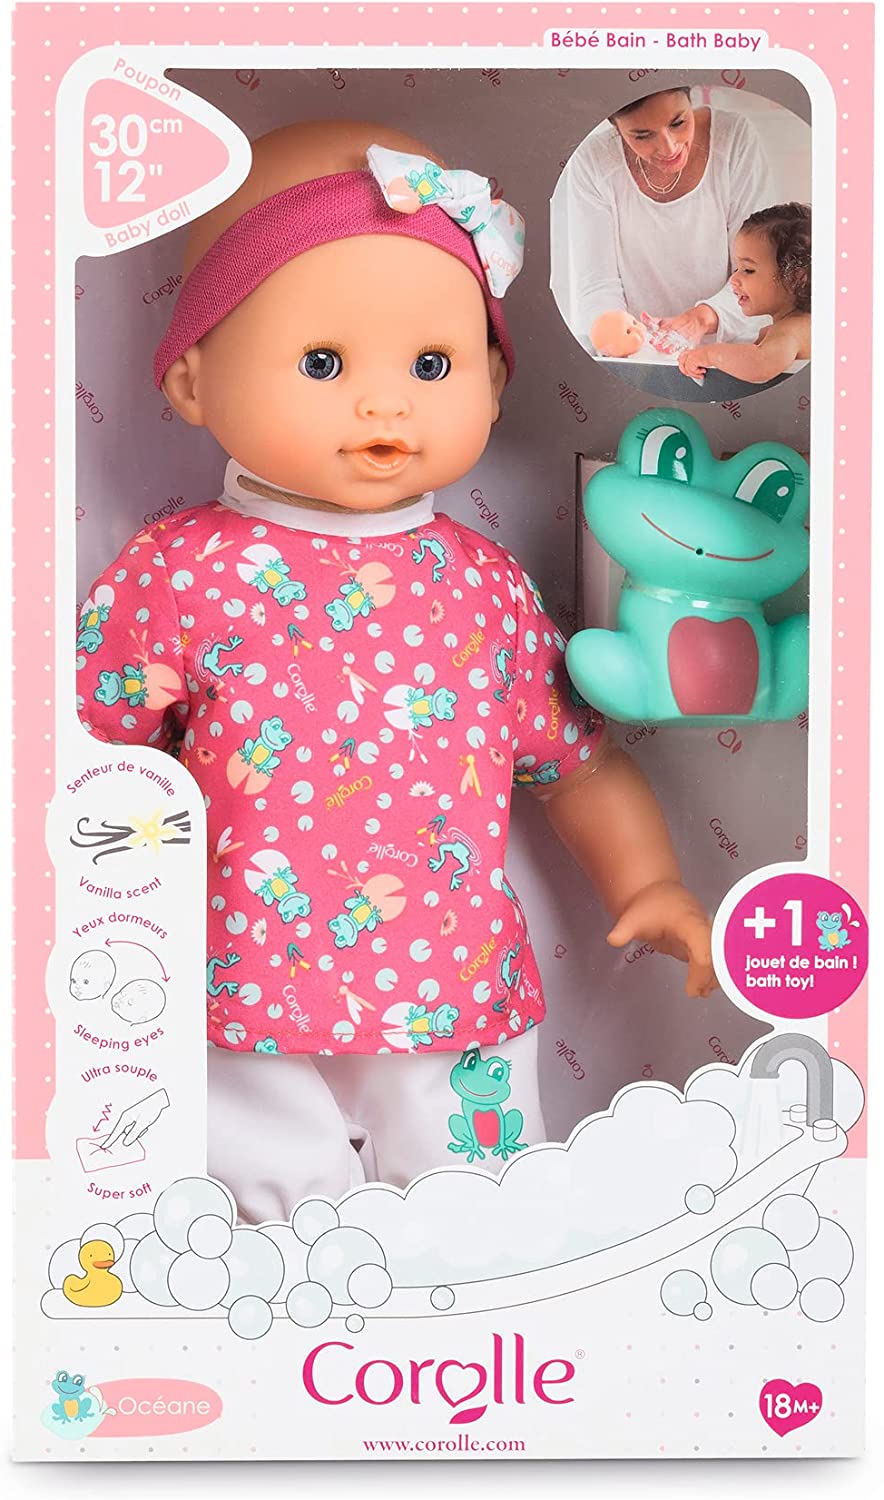 (OPEN BOX) Corolle Bebe Bath Oceane - 12” Girl Baby Doll with Rubber Frog Toy, Safe for Water Play in The Bathtub or Pool, Poseable Soft Body with Vanilla Scent, for Kids Ages 18 Months and Up, Pink